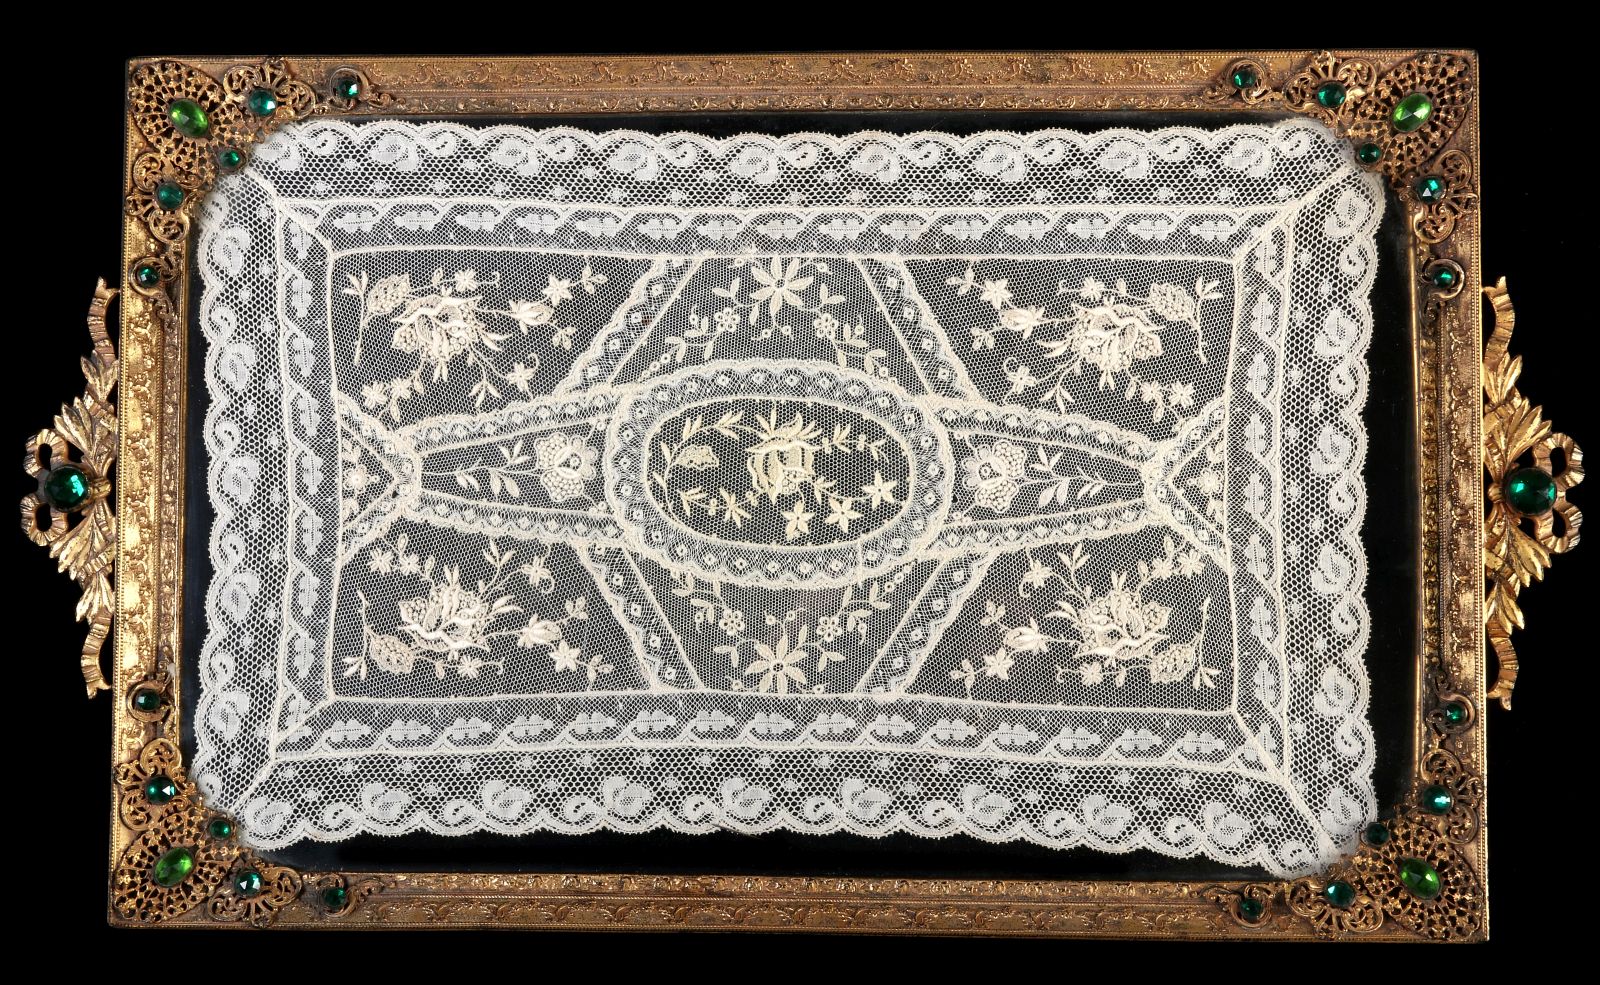 AN ANTIQUE JEWELED BRASS TRAY WITH LACE